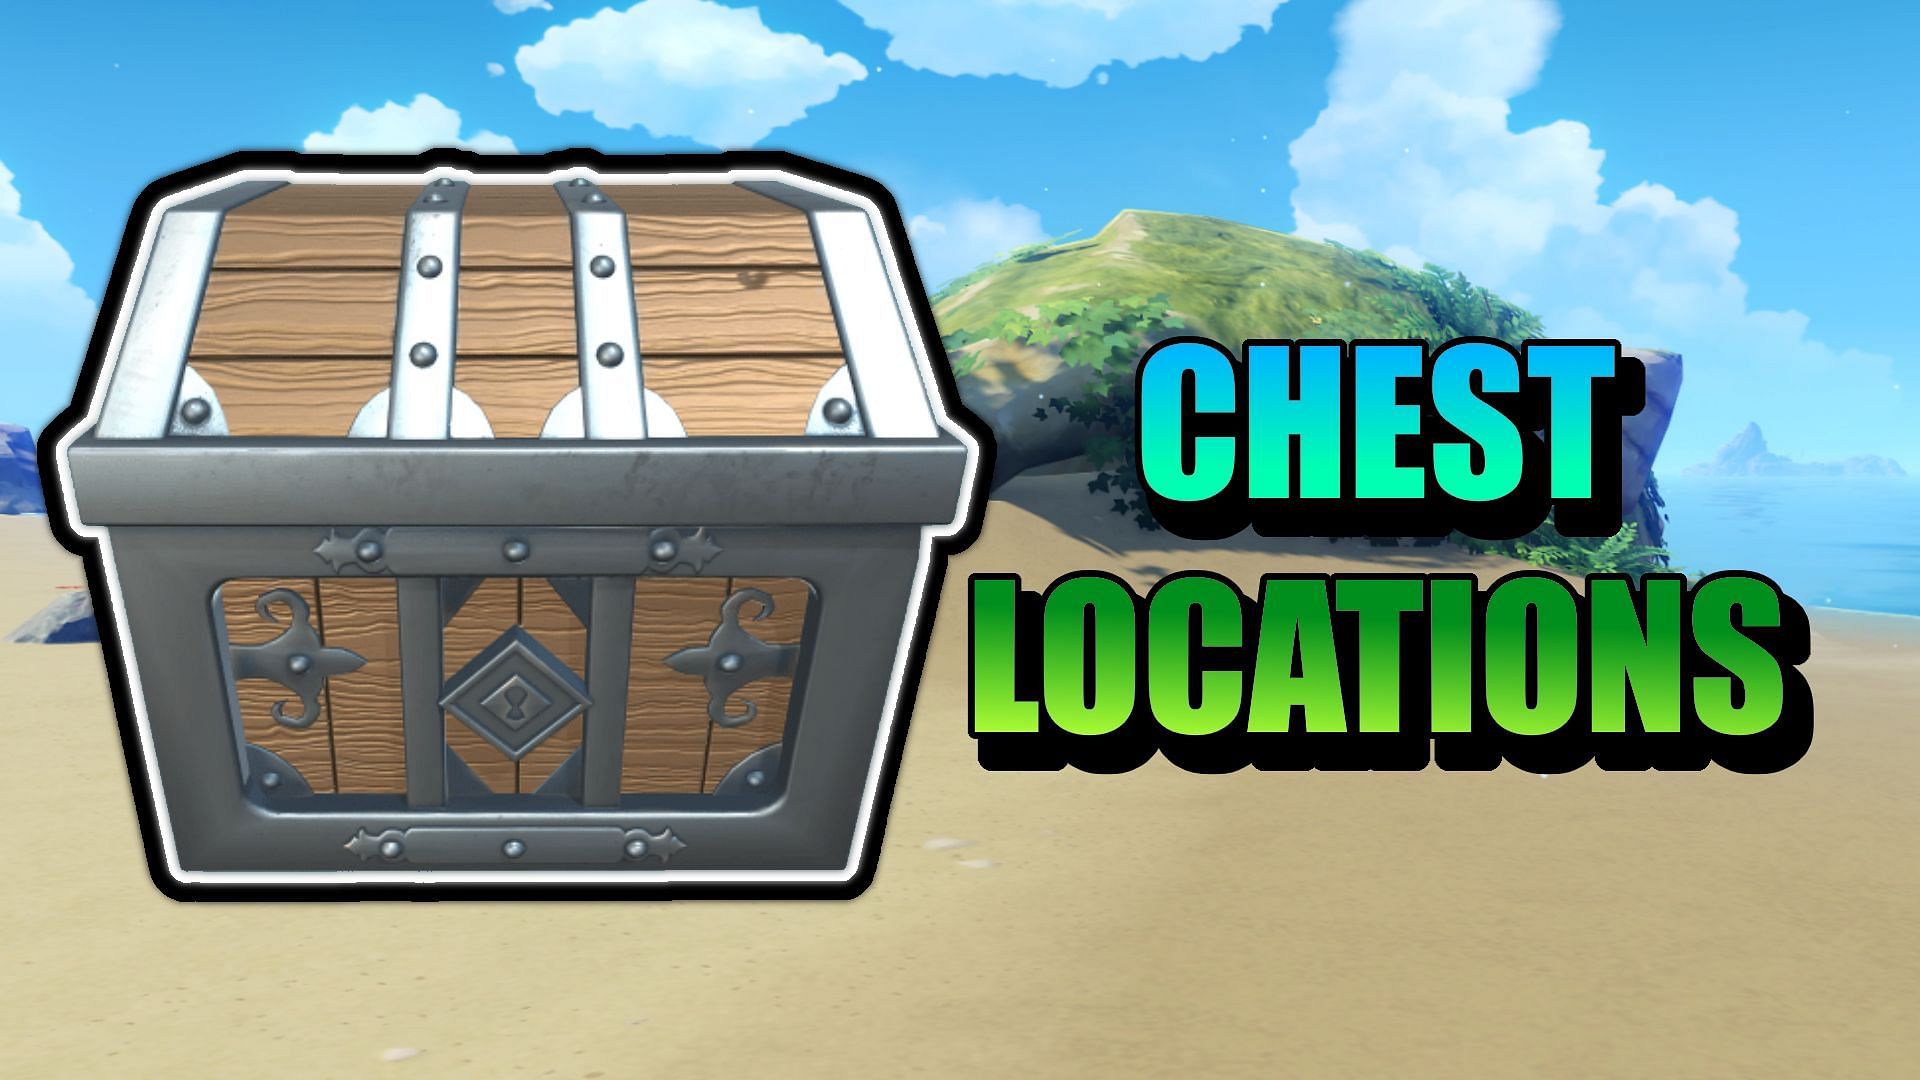 All Chest Locations In Genshin Impact 2 8 Golden Apple Archipelago Day 1